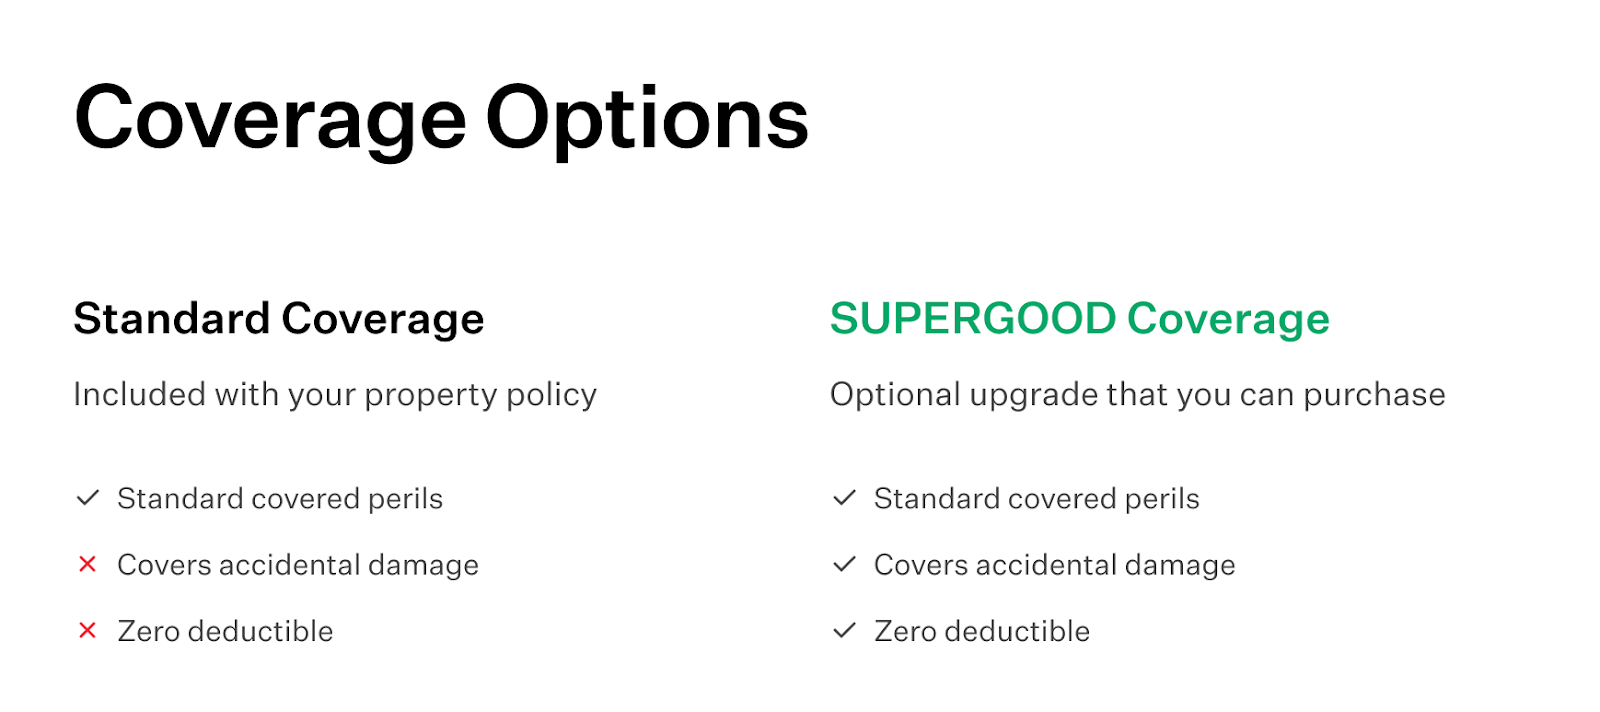 Instead of canceling renters insurance policies, switch to a reliable and affordable insurance provider like Goodcover.